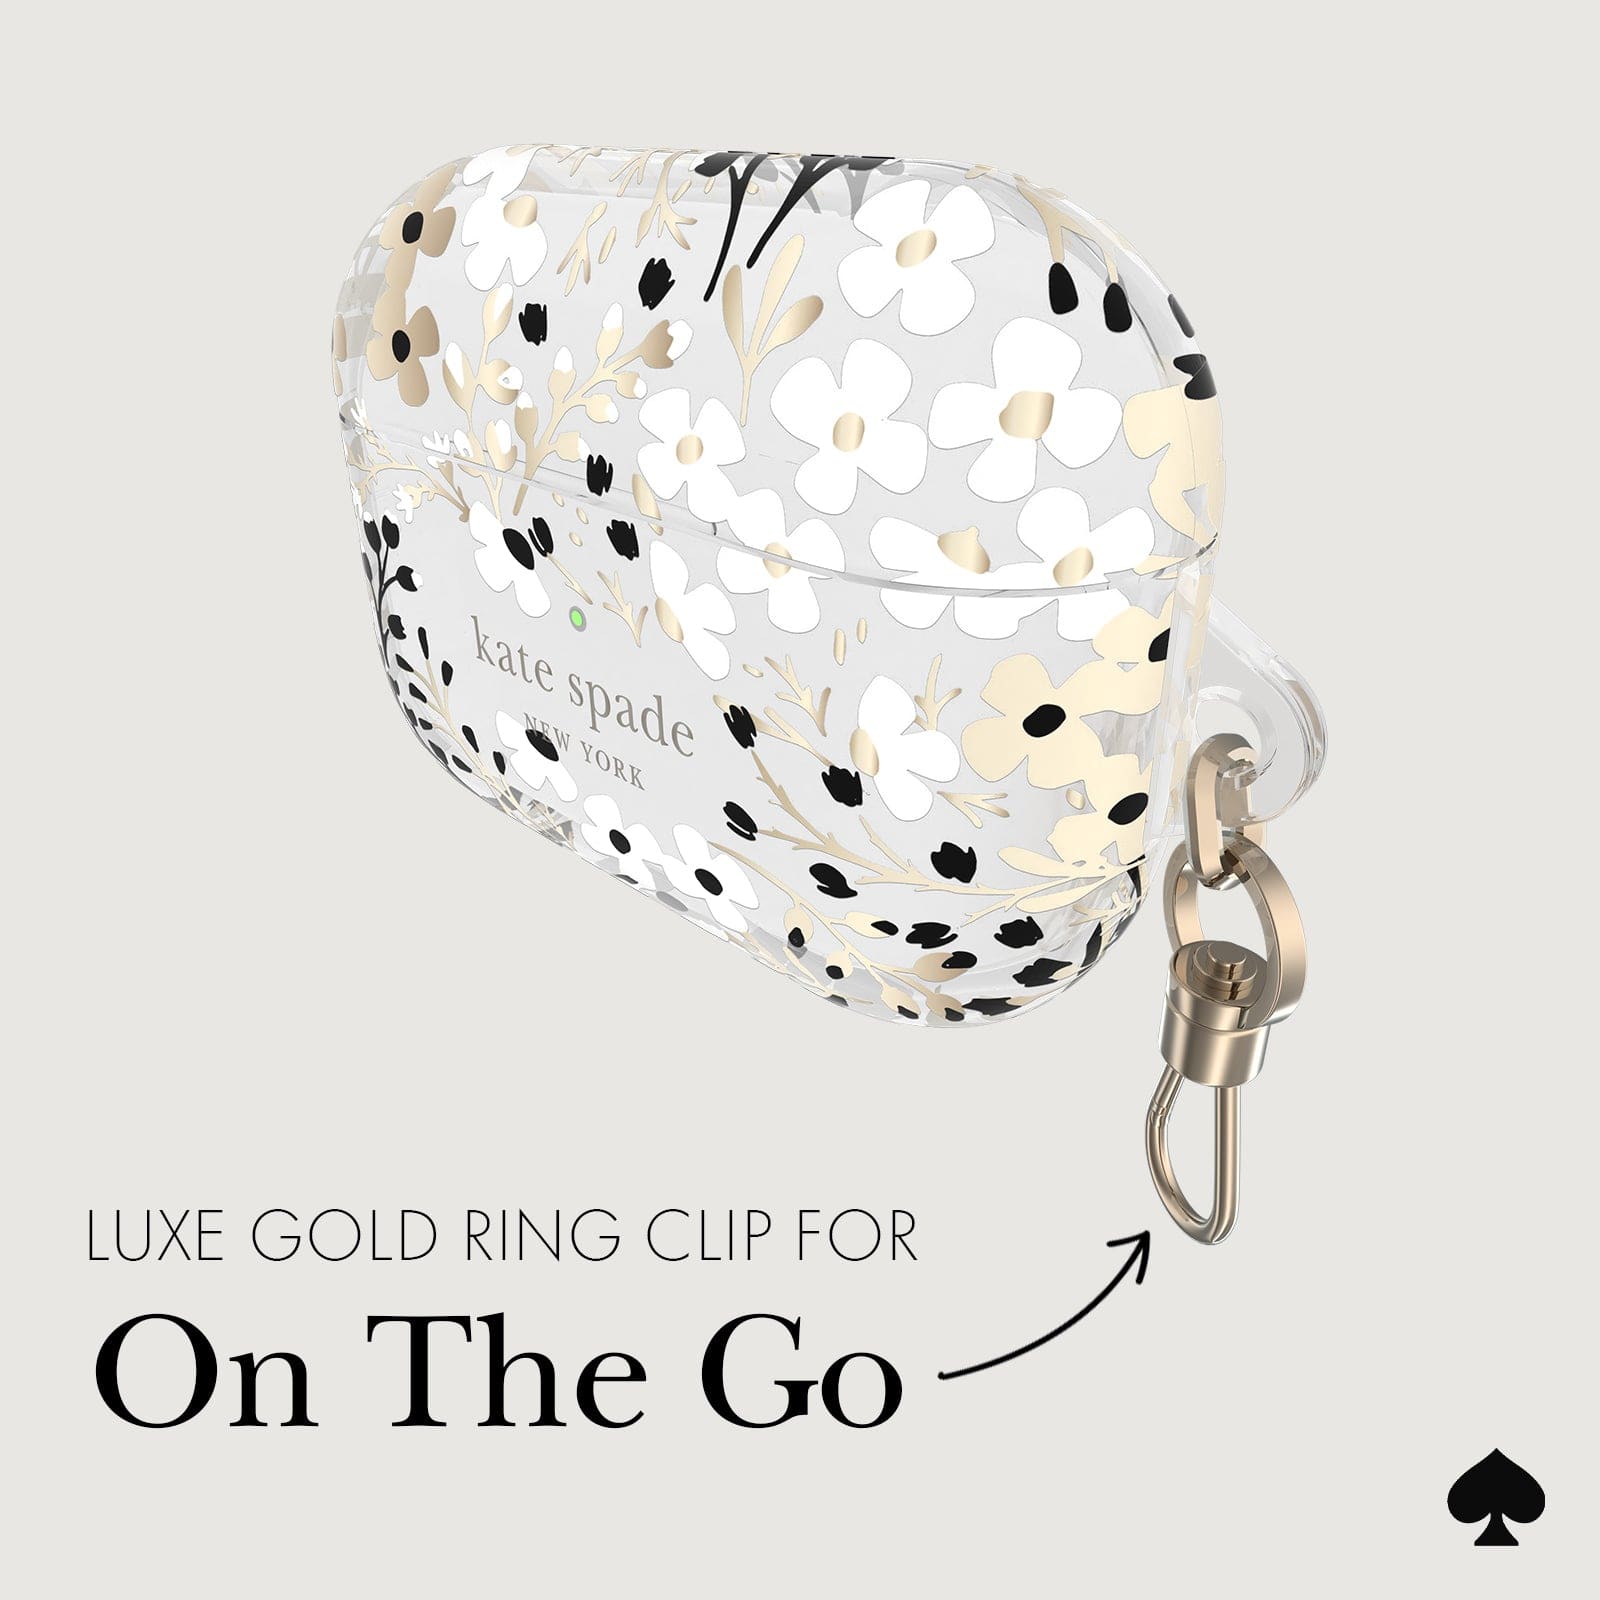 LUXE GOLD RING CLIP FOR ON THE GO